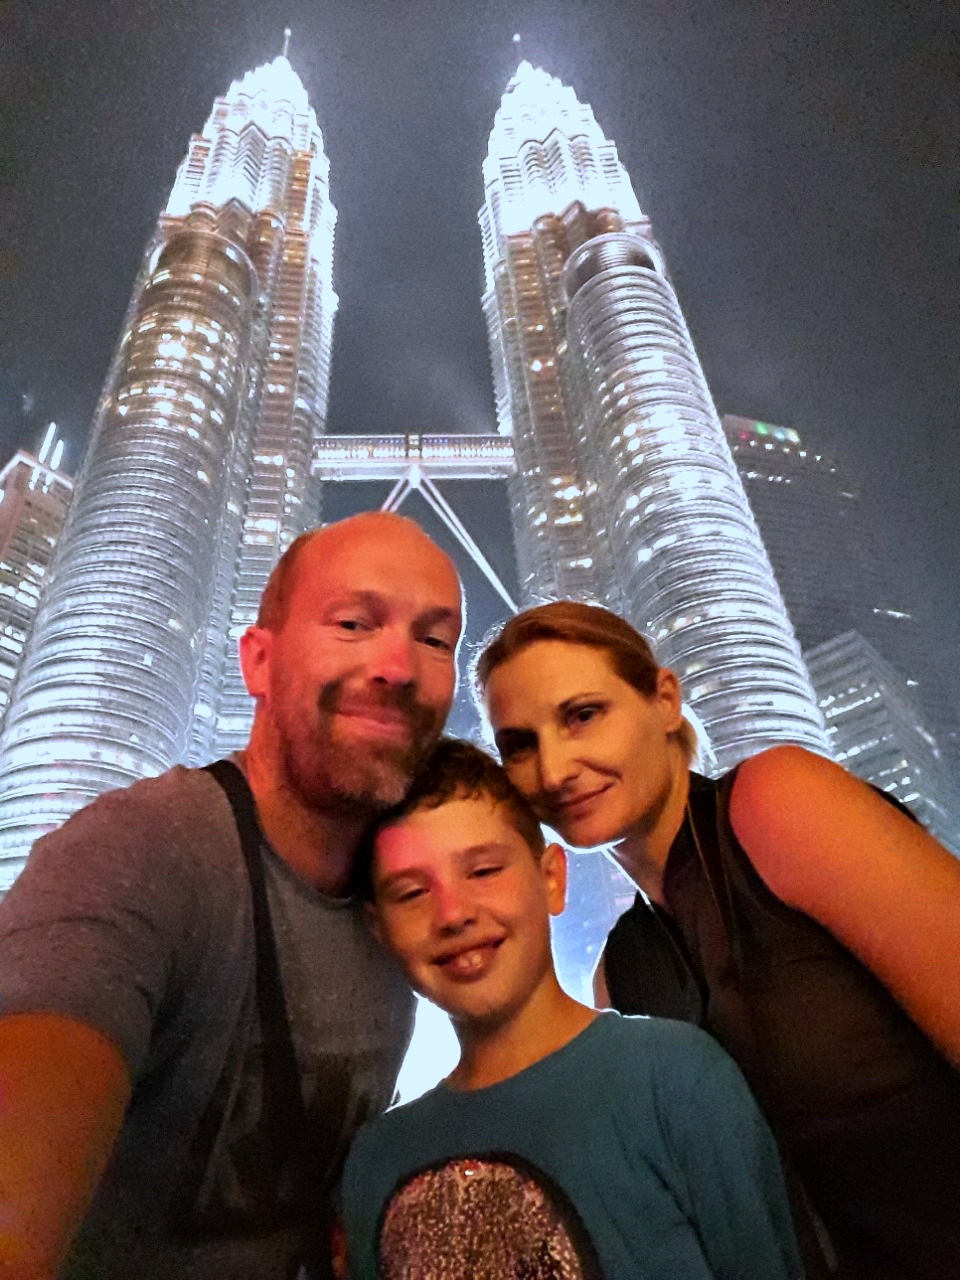 Family photo under the famous Petronas Towers